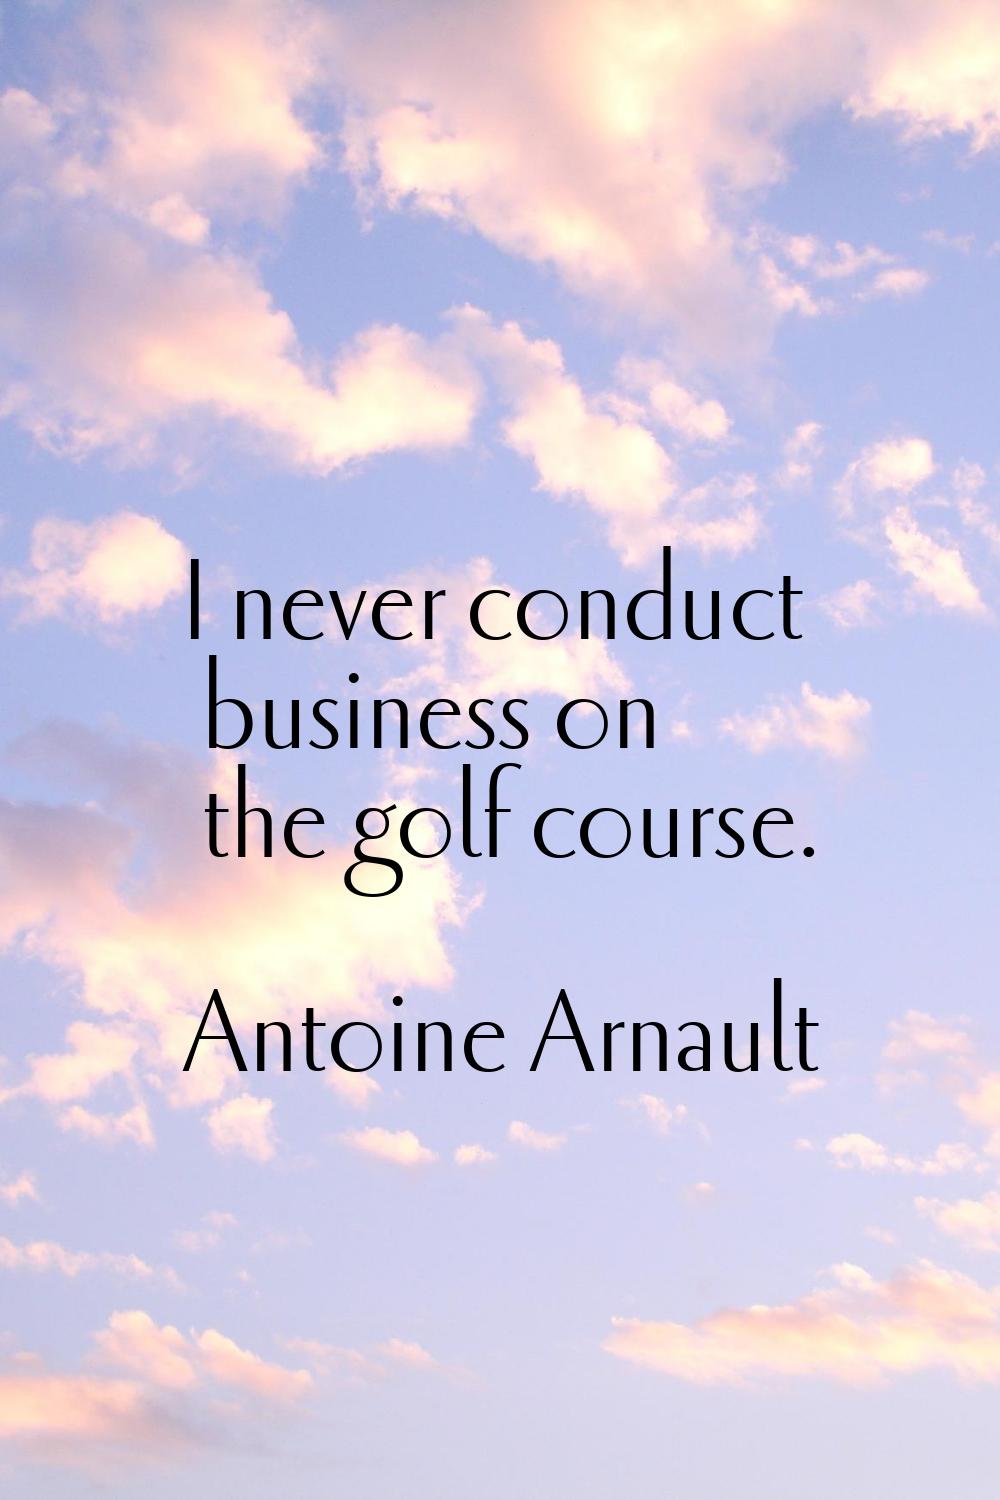 I never conduct business on the golf course.